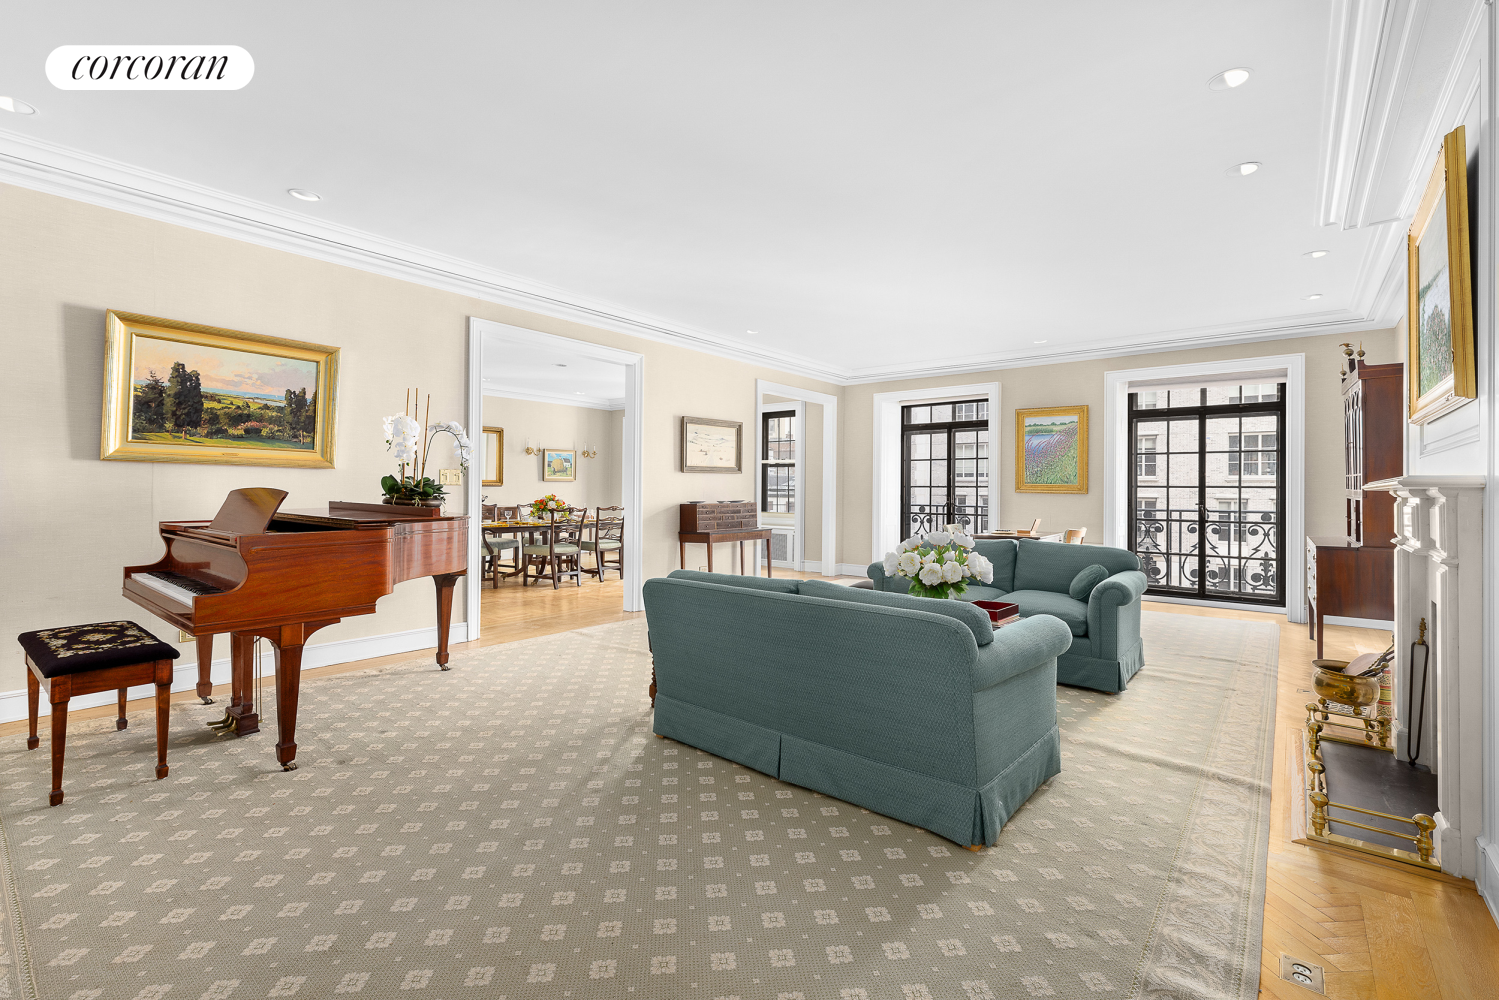 136 East 79th Street 6A, Lenox Hill, Upper East Side, NYC - 4 Bedrooms  
4 Bathrooms  
8 Rooms - 